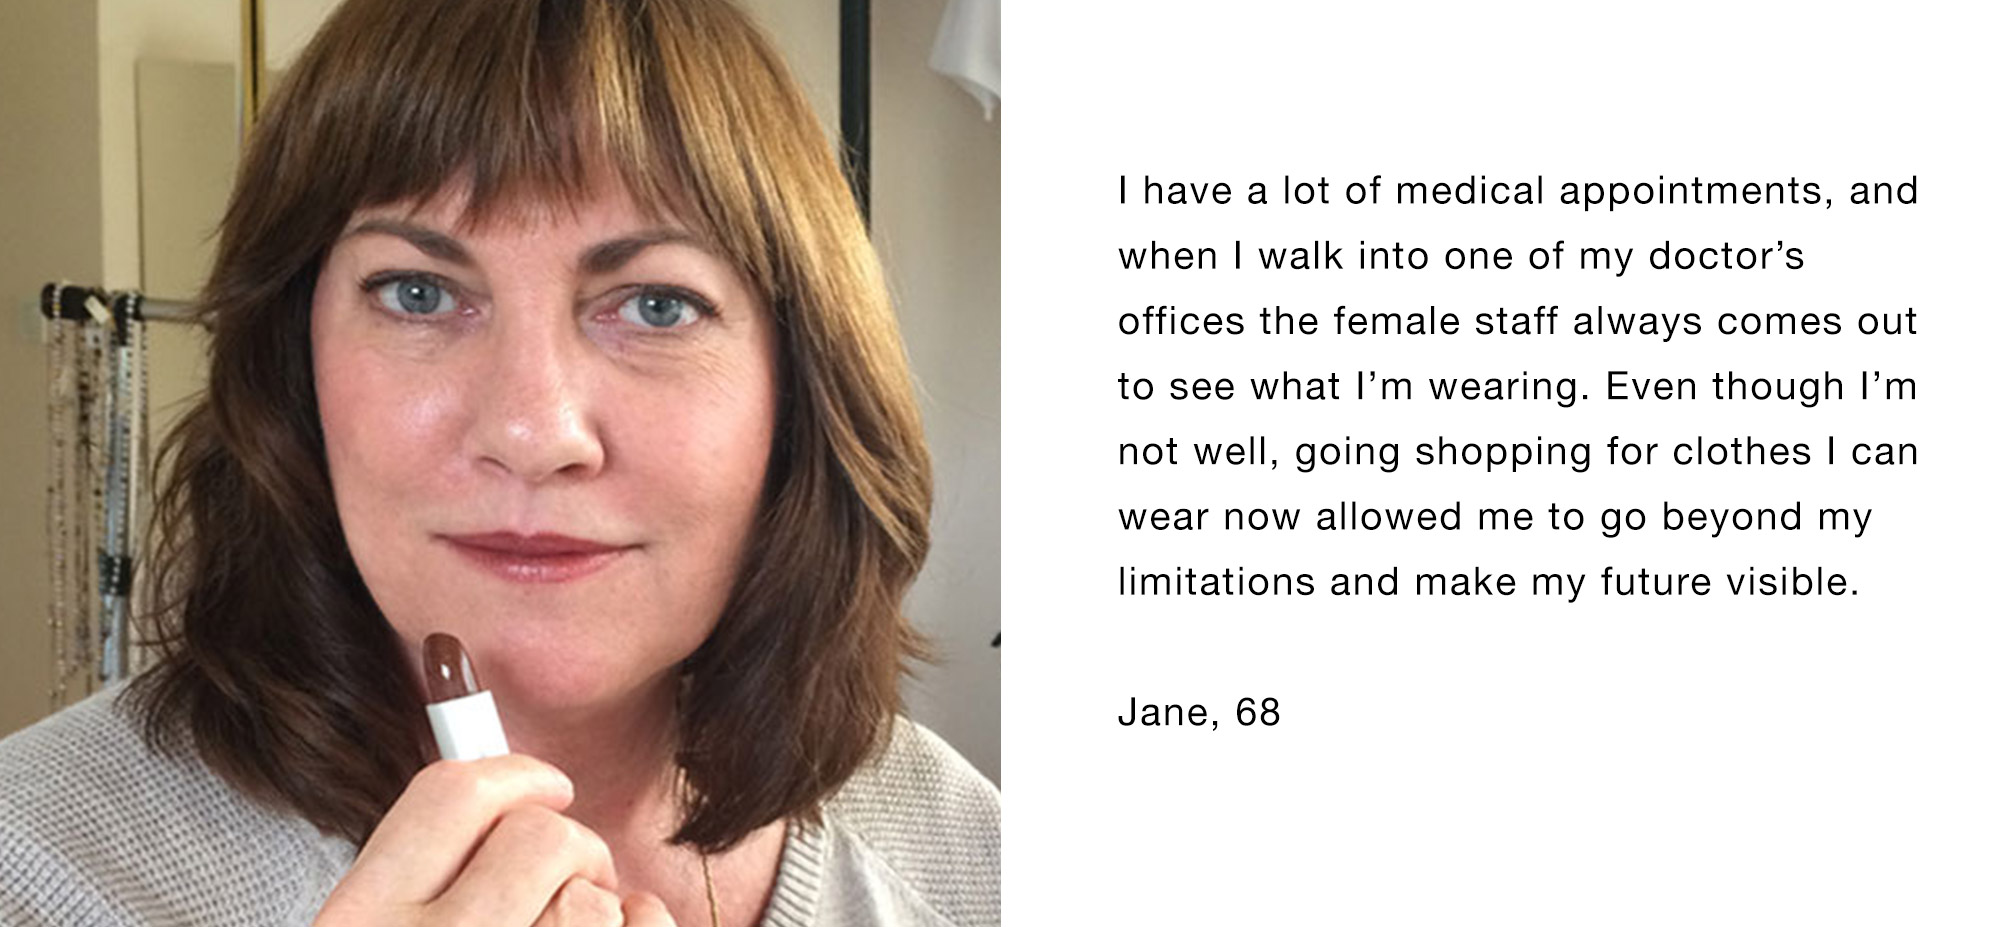 I have a lot of medical appointments, and when I walk into one of my doctor’s offices the female staff always comes out to see what I’m wearing. Even though I’m not well, going shopping for clothes I can wear now allowed me to go beyond my limitations and make my future visible. Jane, 68